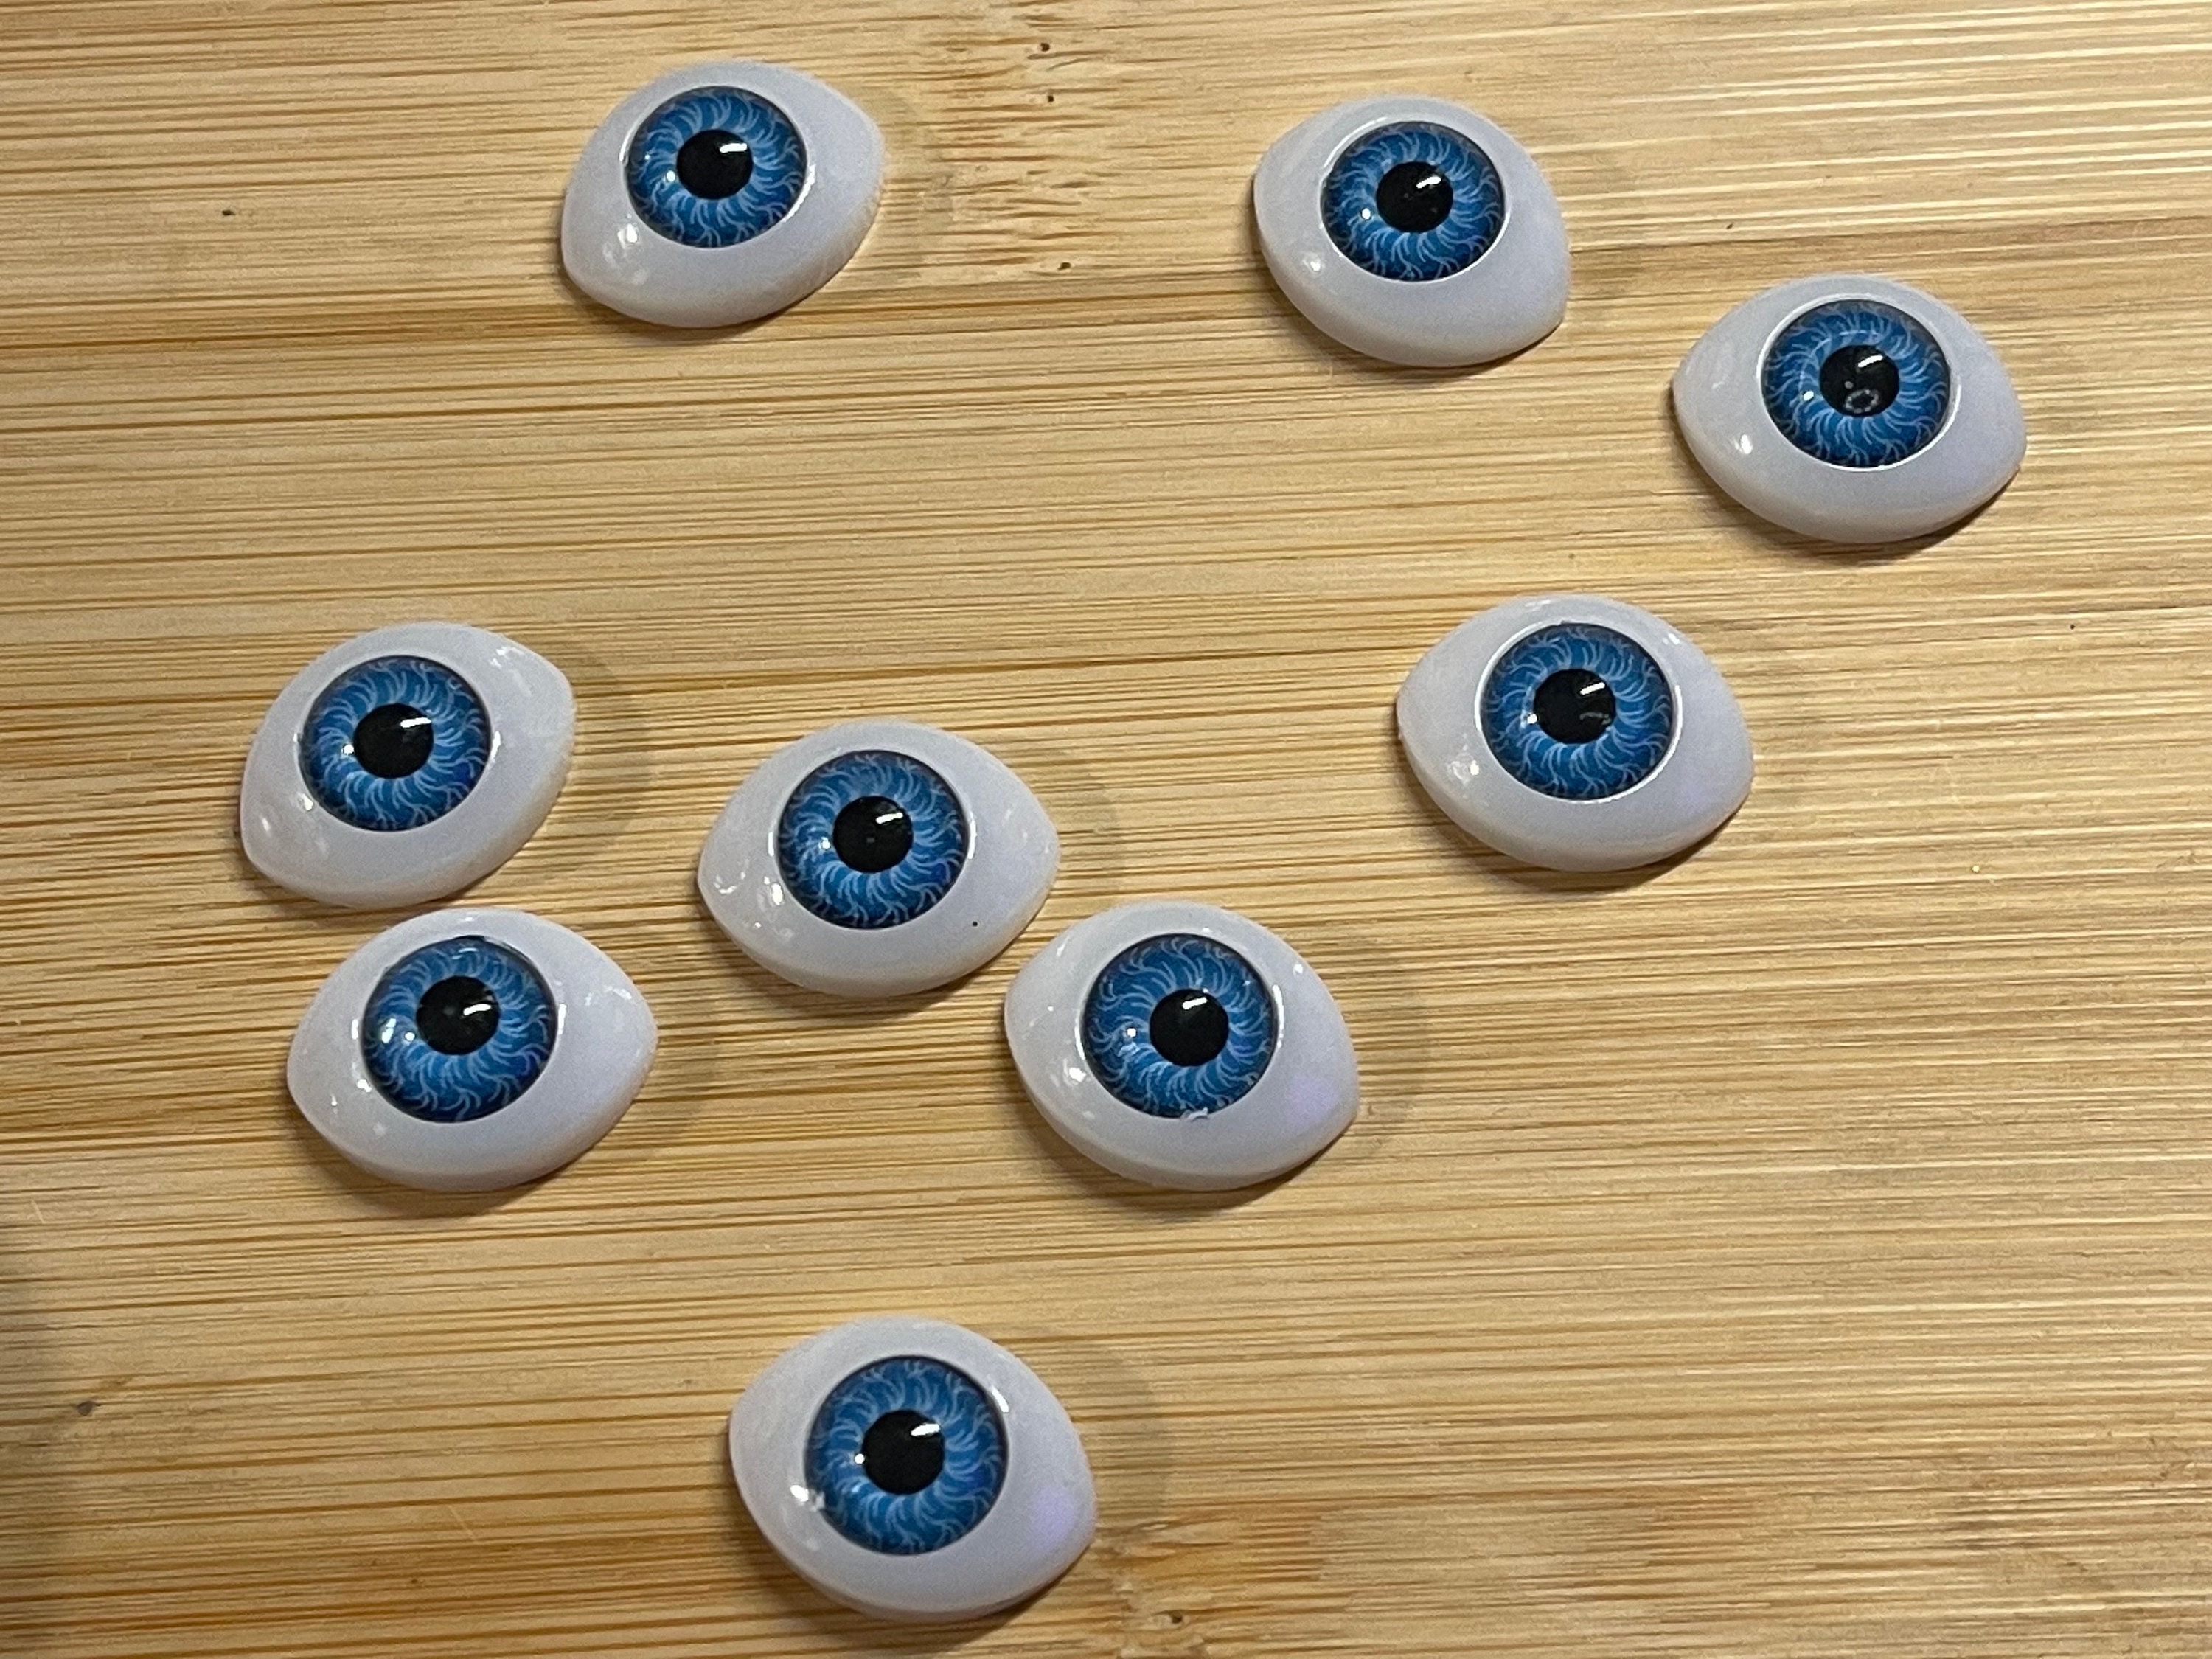 fake eyeballs products for sale